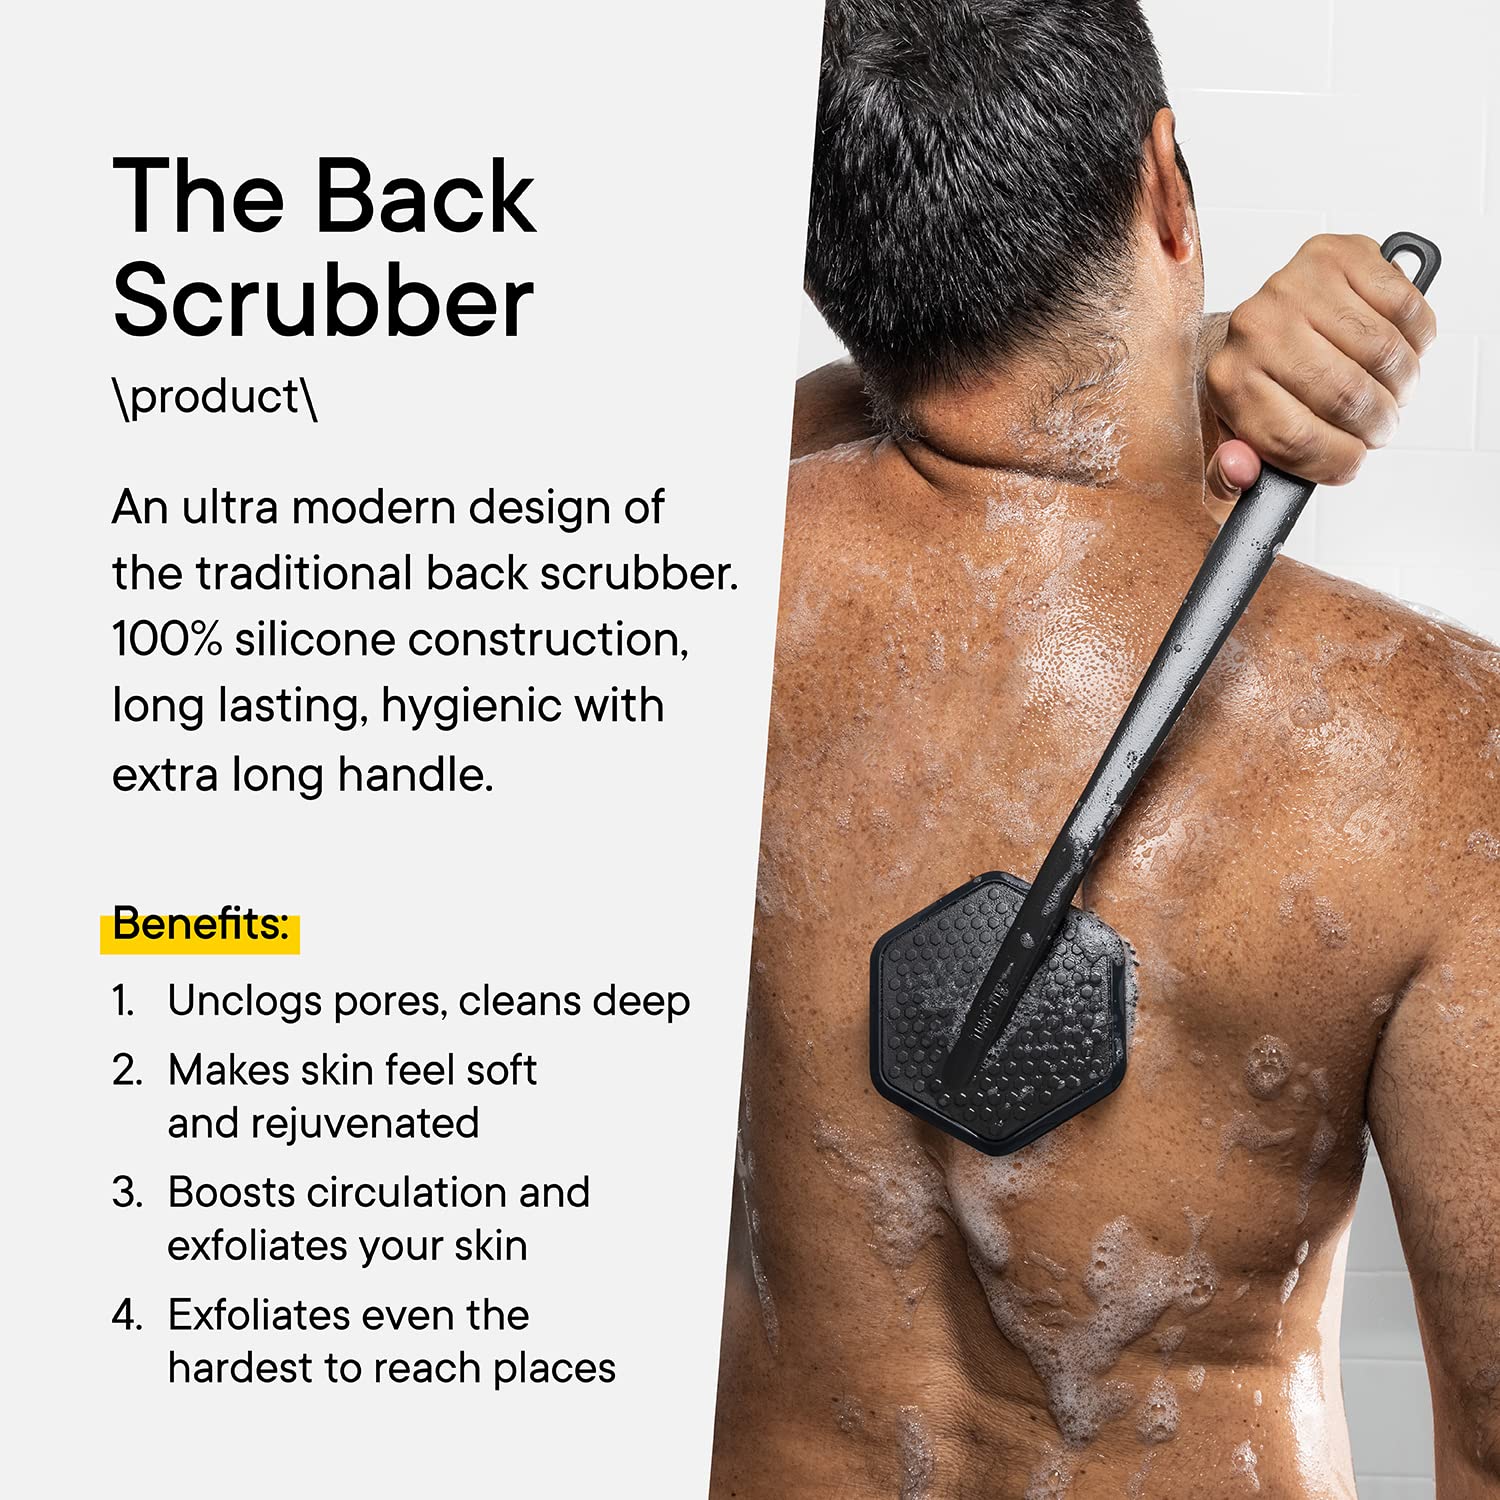 Tooletries - Back Scrubber & Hook - Silicone Long Handle Bath Shower Back Brush, Back Scrubber Body Exfoliator + Removable & Reusable Hook - Charcoal